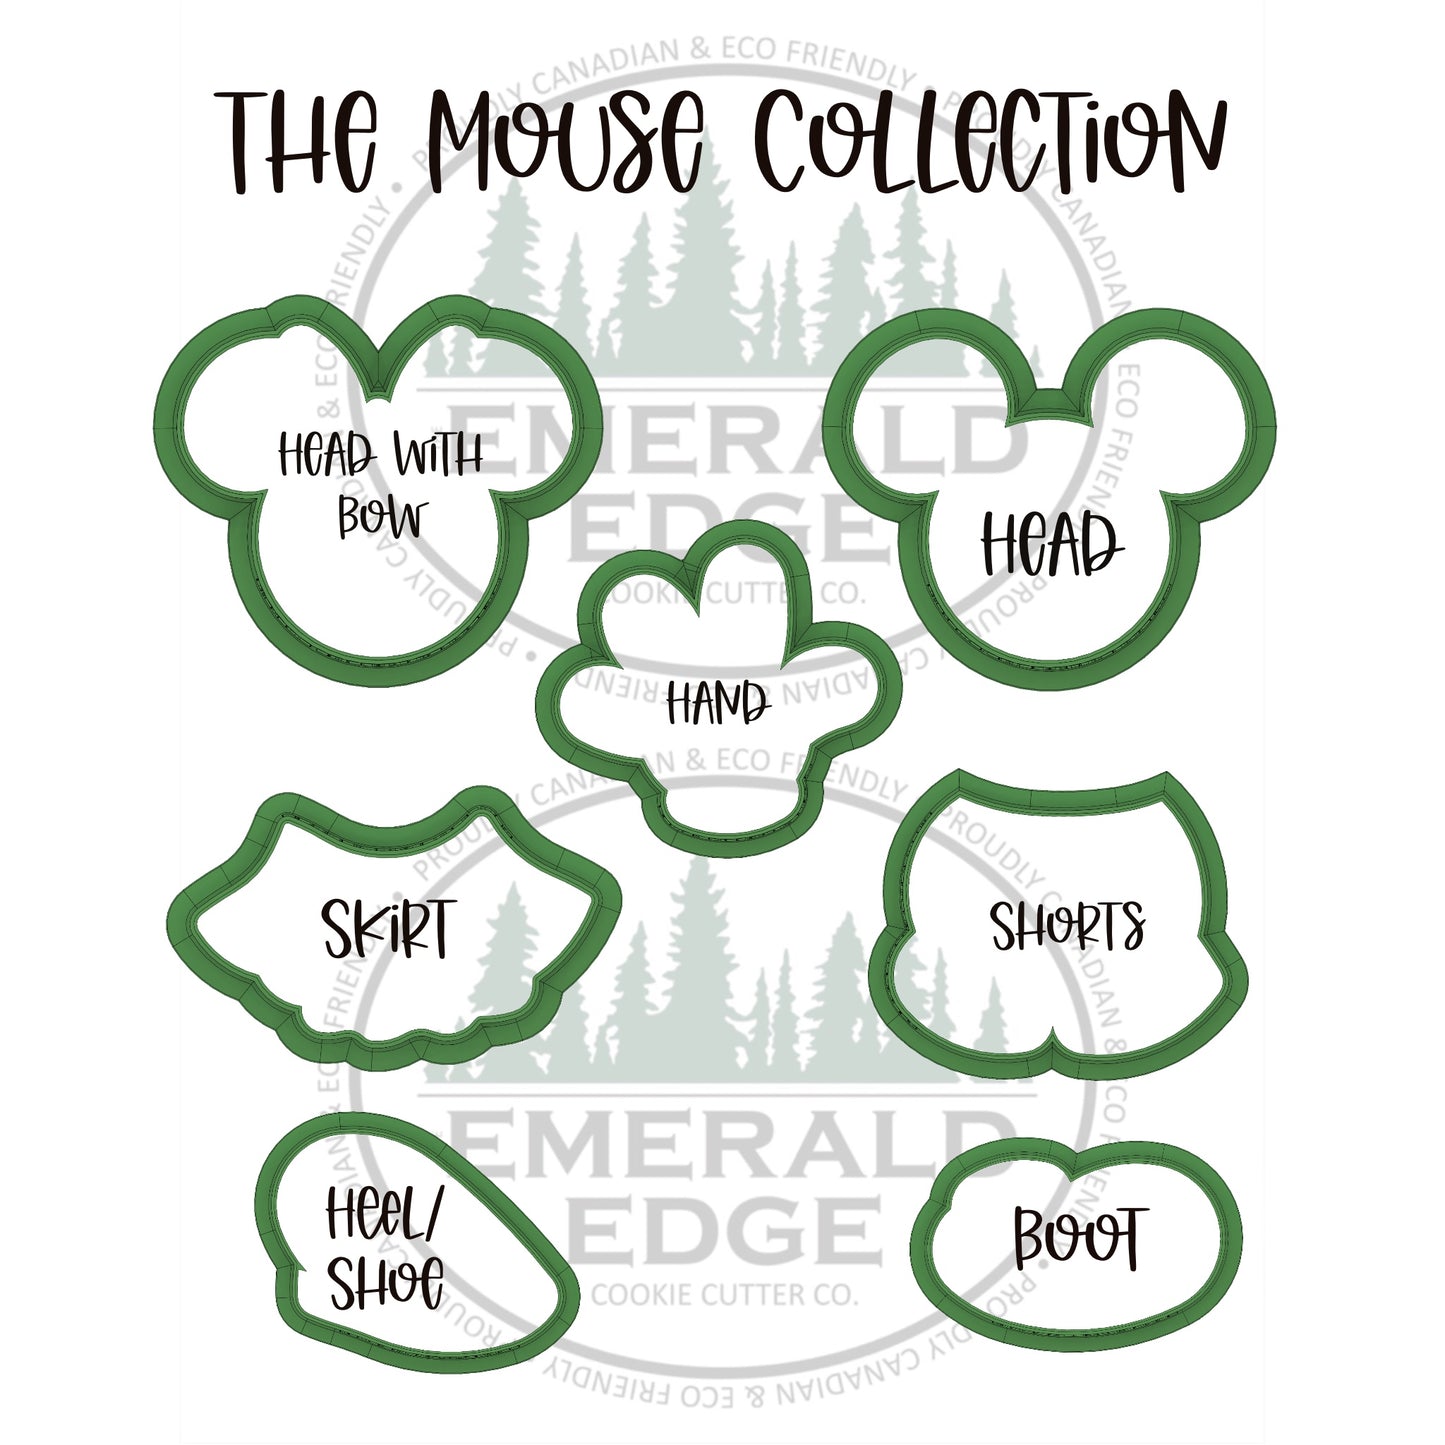 The Mouse Collection